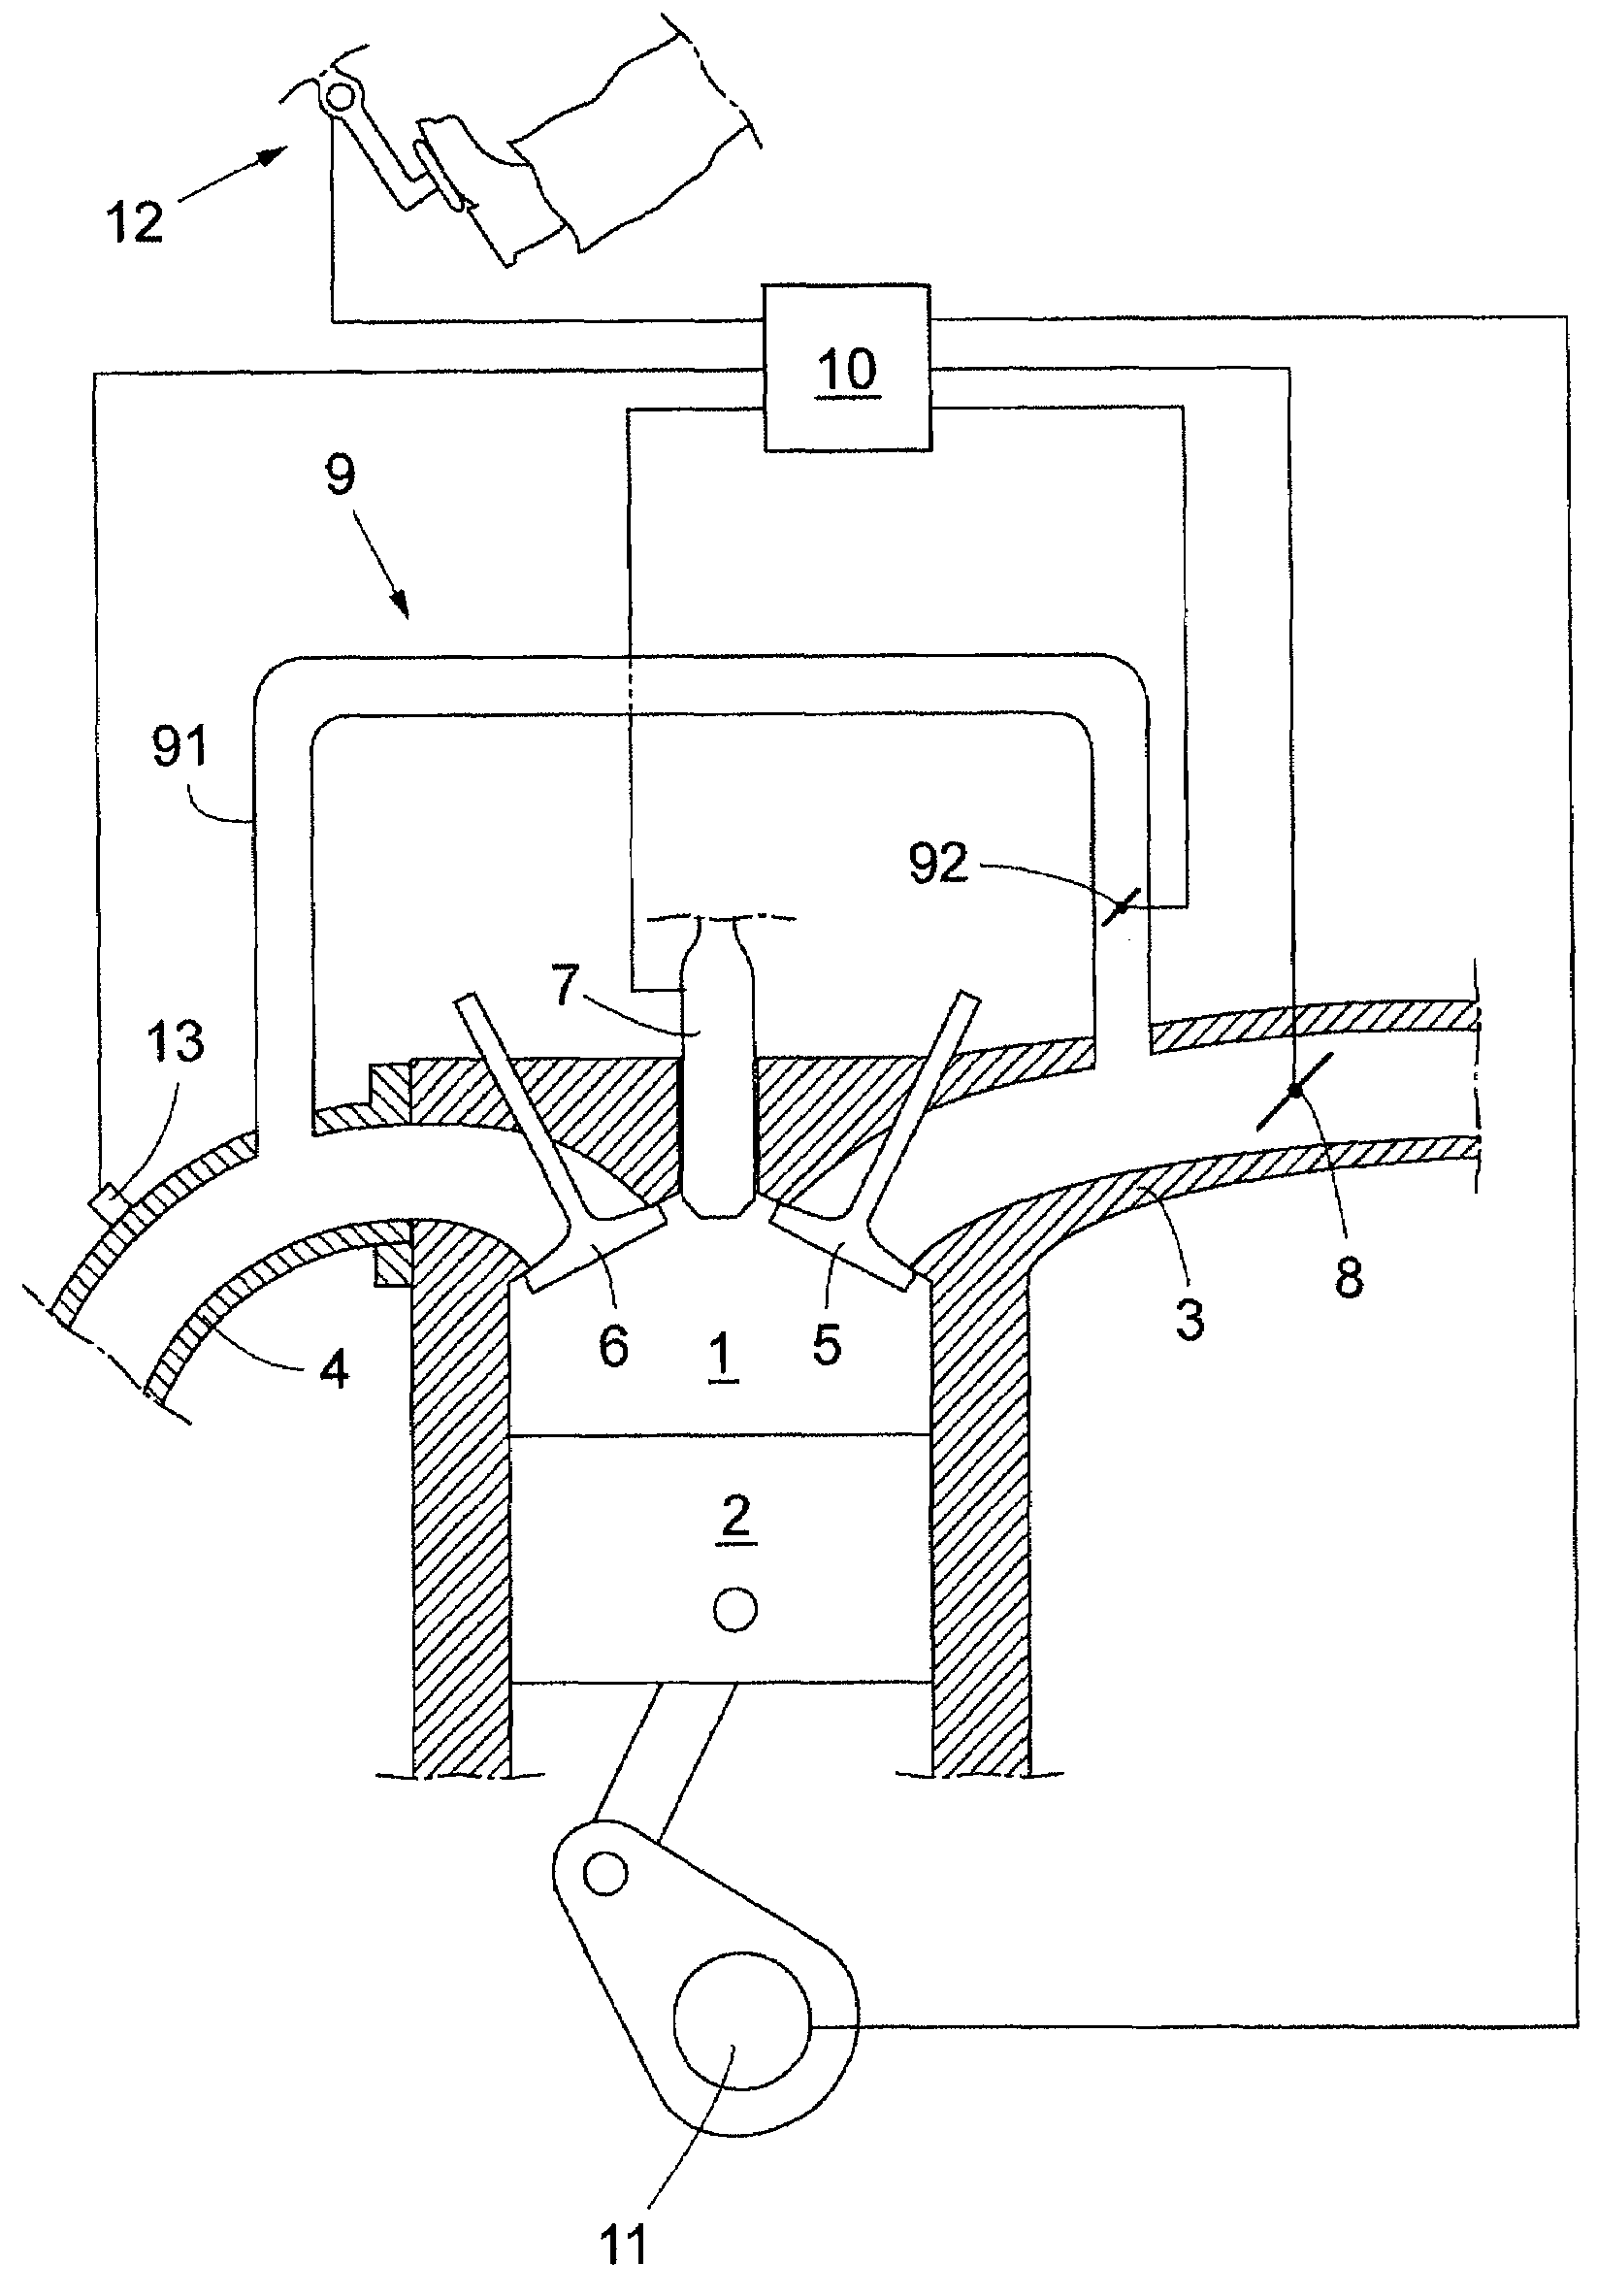 Internal combustion engine and a method for such an engine